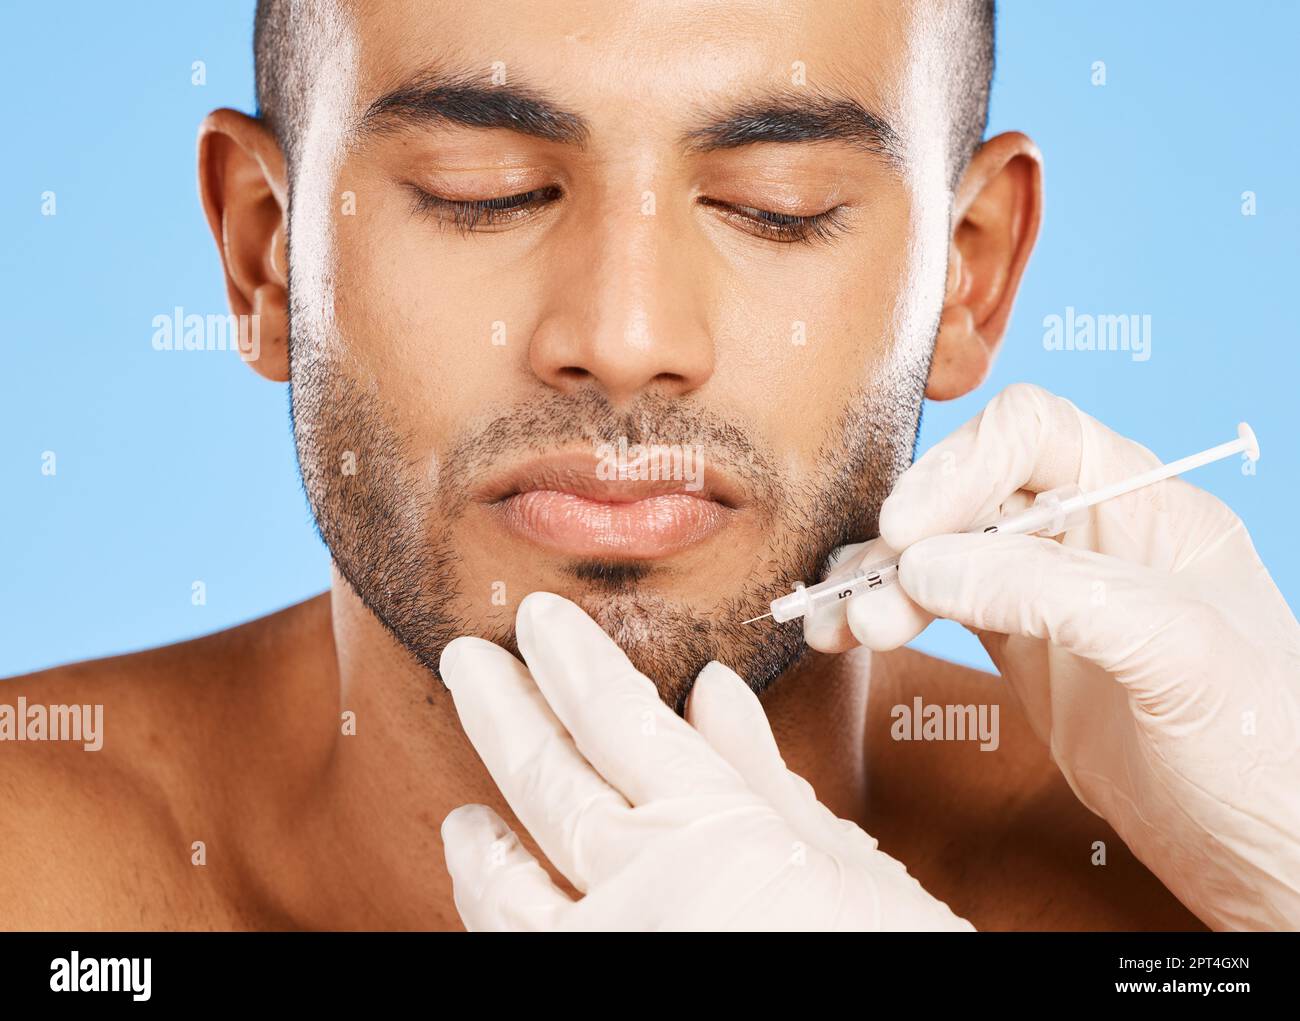 Beauty, facial and botox with face of man for plastic surgery, aesthetic and skincare. Medical, prp injection and spa with model against blue backgrou Stock Photo